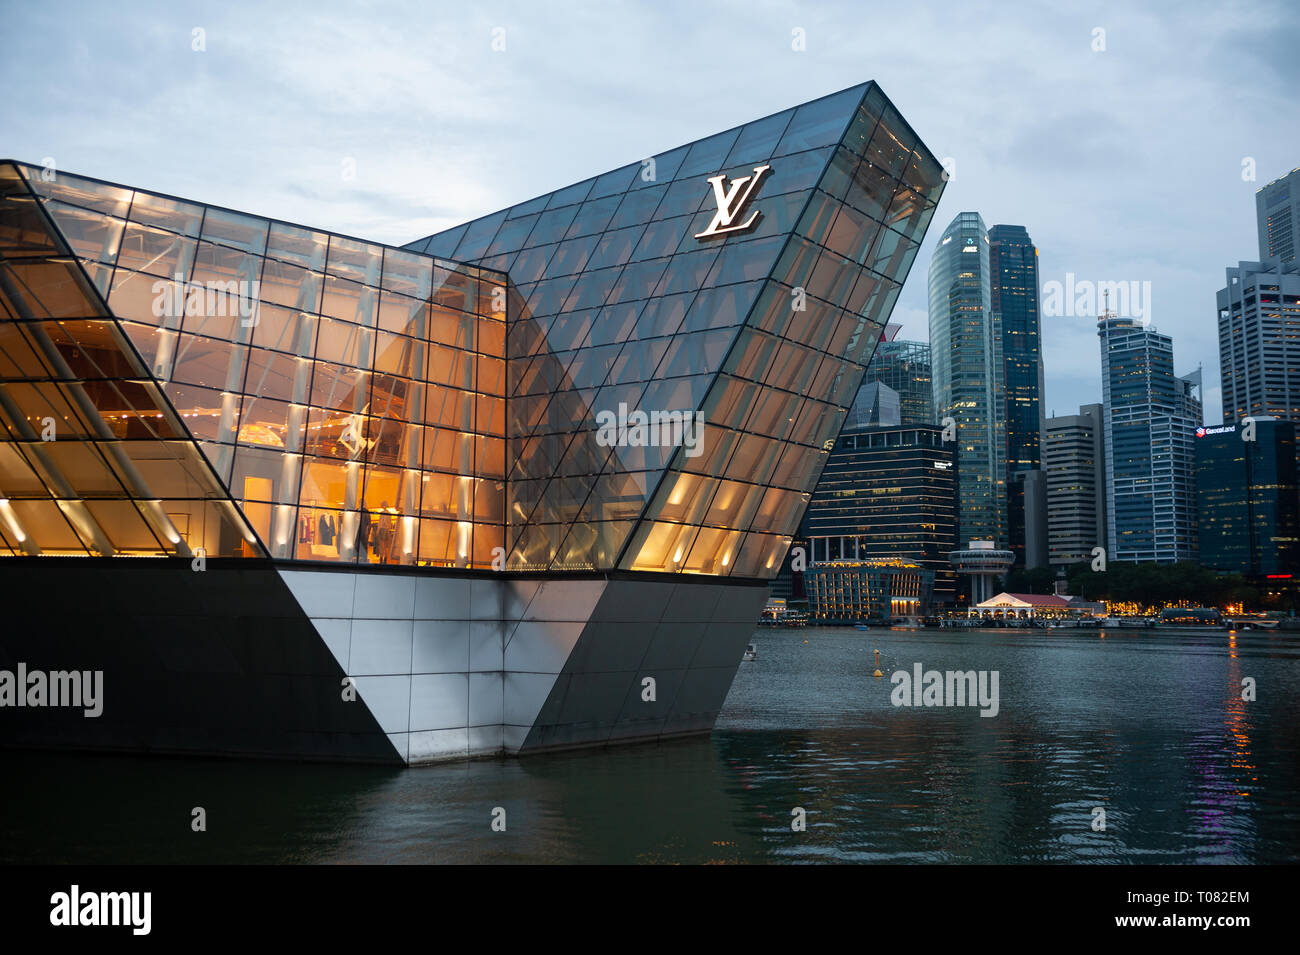 Louis Vuitton's Cruise Collection pays an ode to New York's skyline